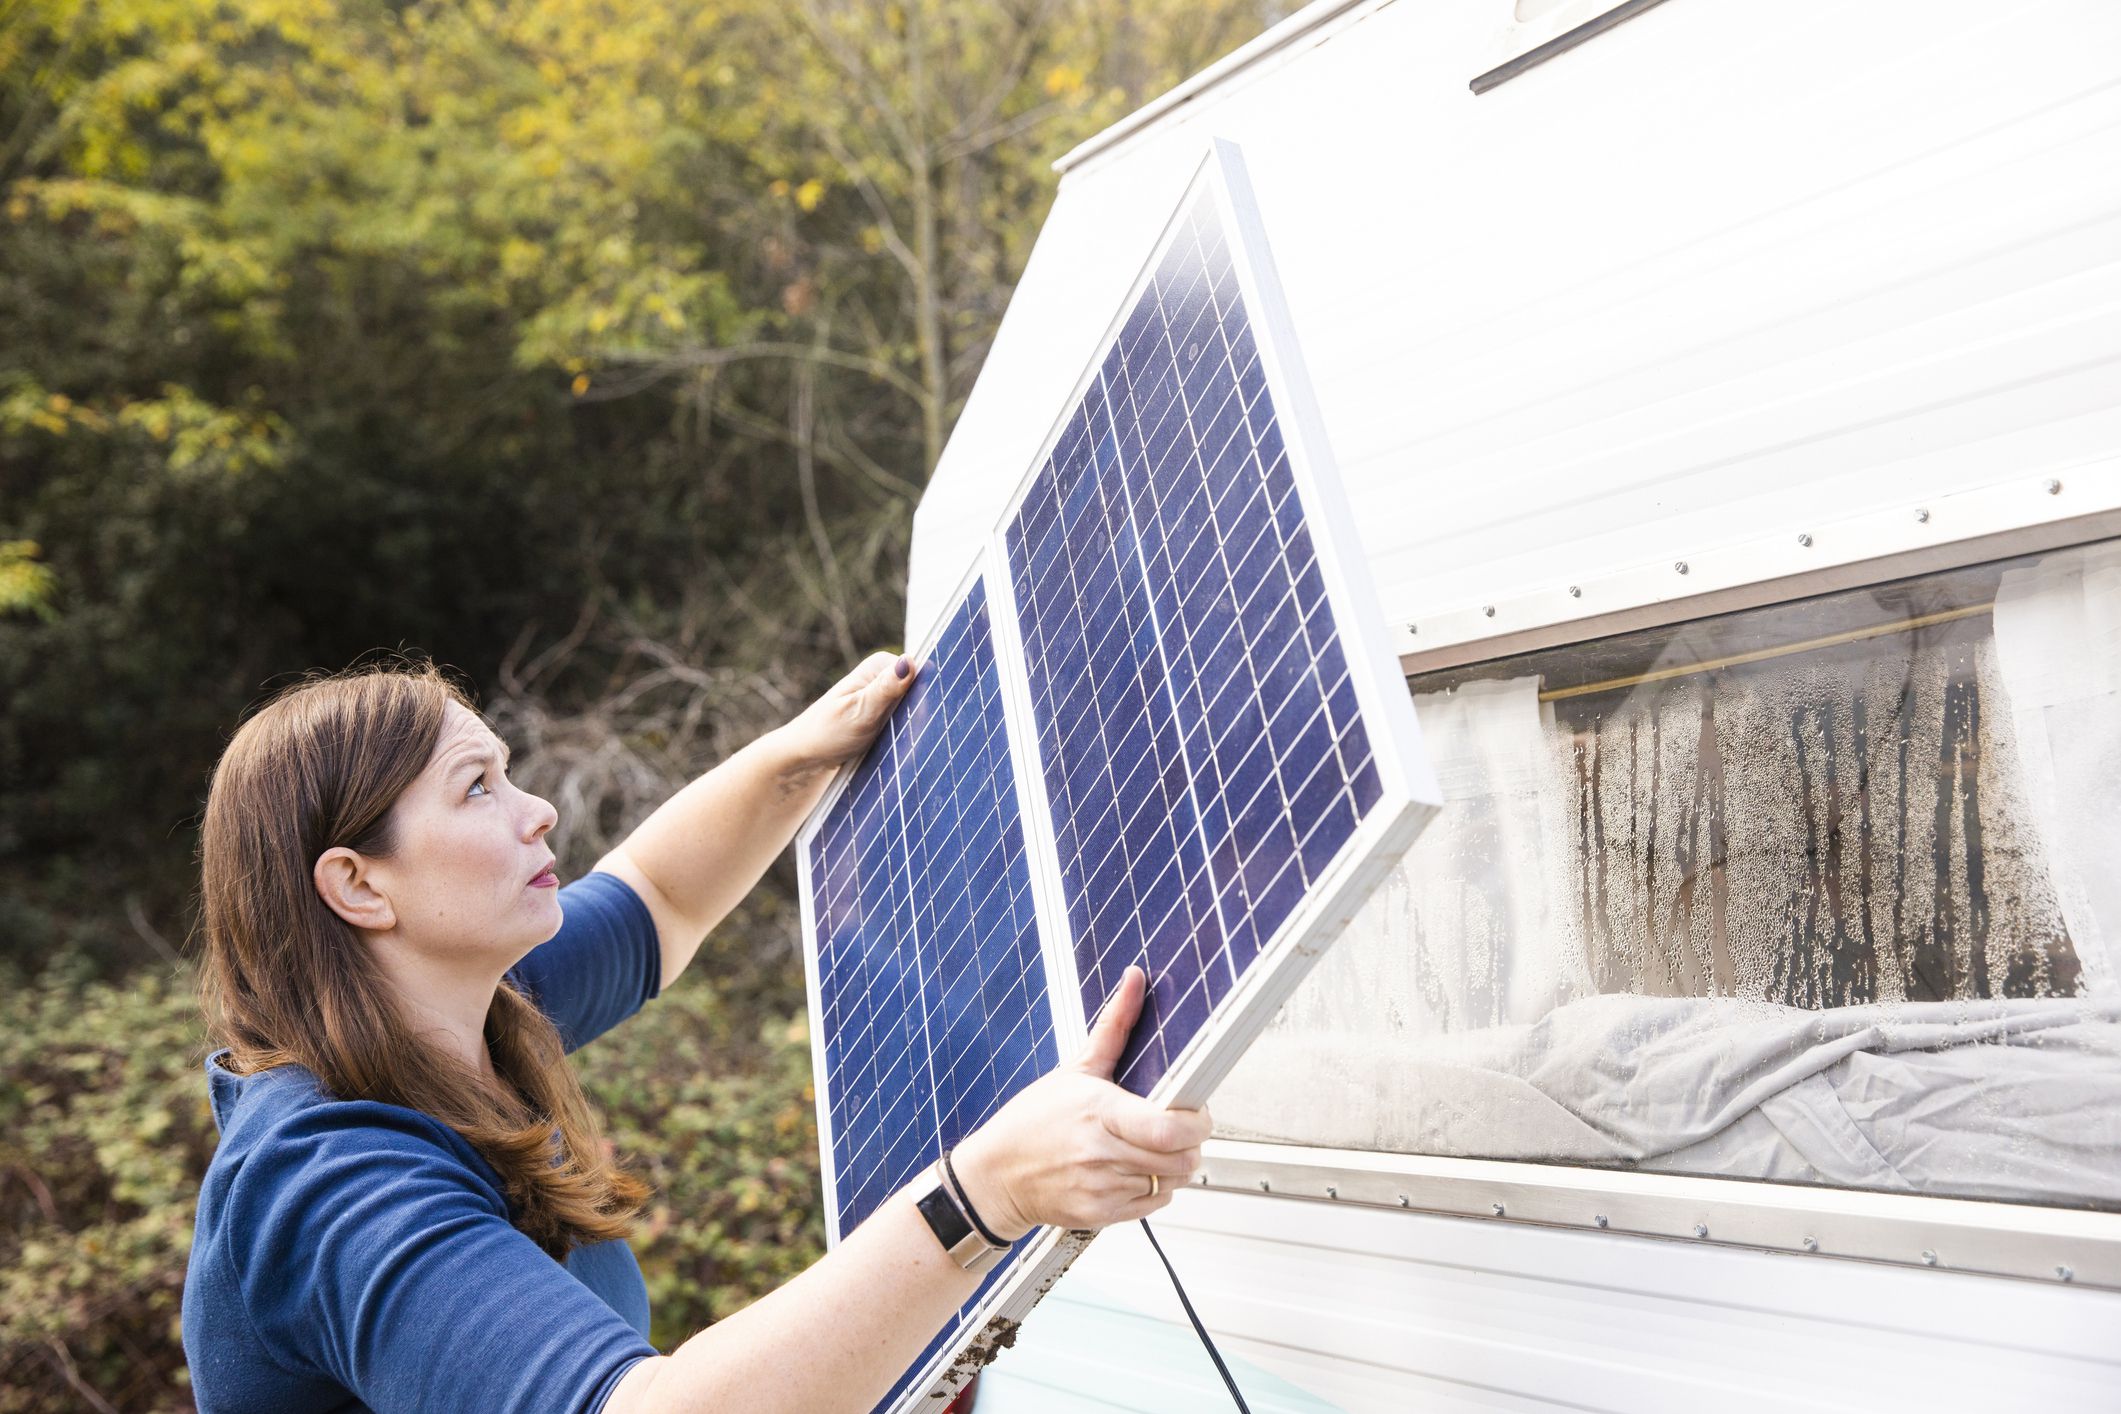 <p>Given their love of the great outdoors, it should be no surprise that some RVers have taken extra steps to reduce the environmental impact of their vehicles. Go RVing says that nearly 20% of RVers use solar panels to run some of their on-board systems. While there are some<a href="https://camperreport.com/rv-solar-power/"> downsides to solar</a>, one huge benefit is that many RVers qualify for a <a href="https://www.rvtravel.com/tax-corner-tax-credit-for-solar-panels-on-an-rv/">solar tax credit</a>. </p>